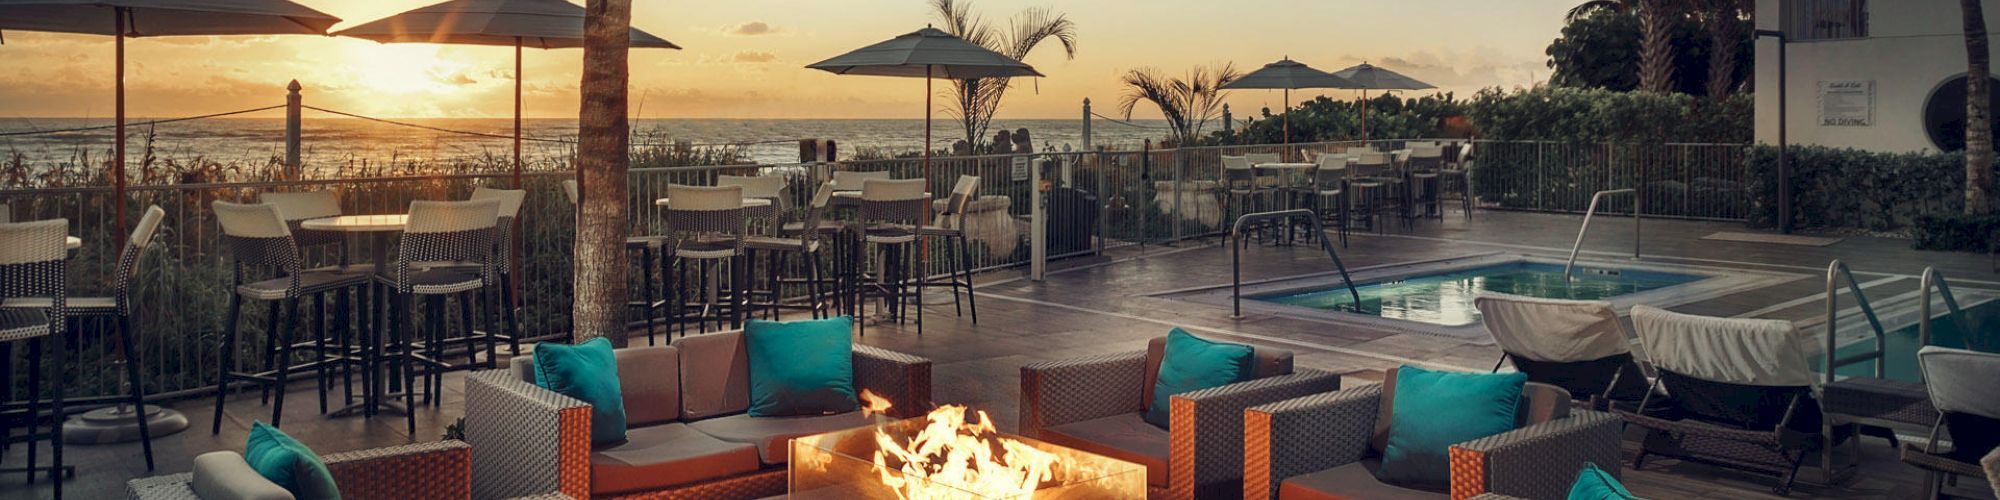 Outdoor seating area with wicker furniture, cushioned chairs, fire pit, string lights, and pool against a sunset beach backdrop.